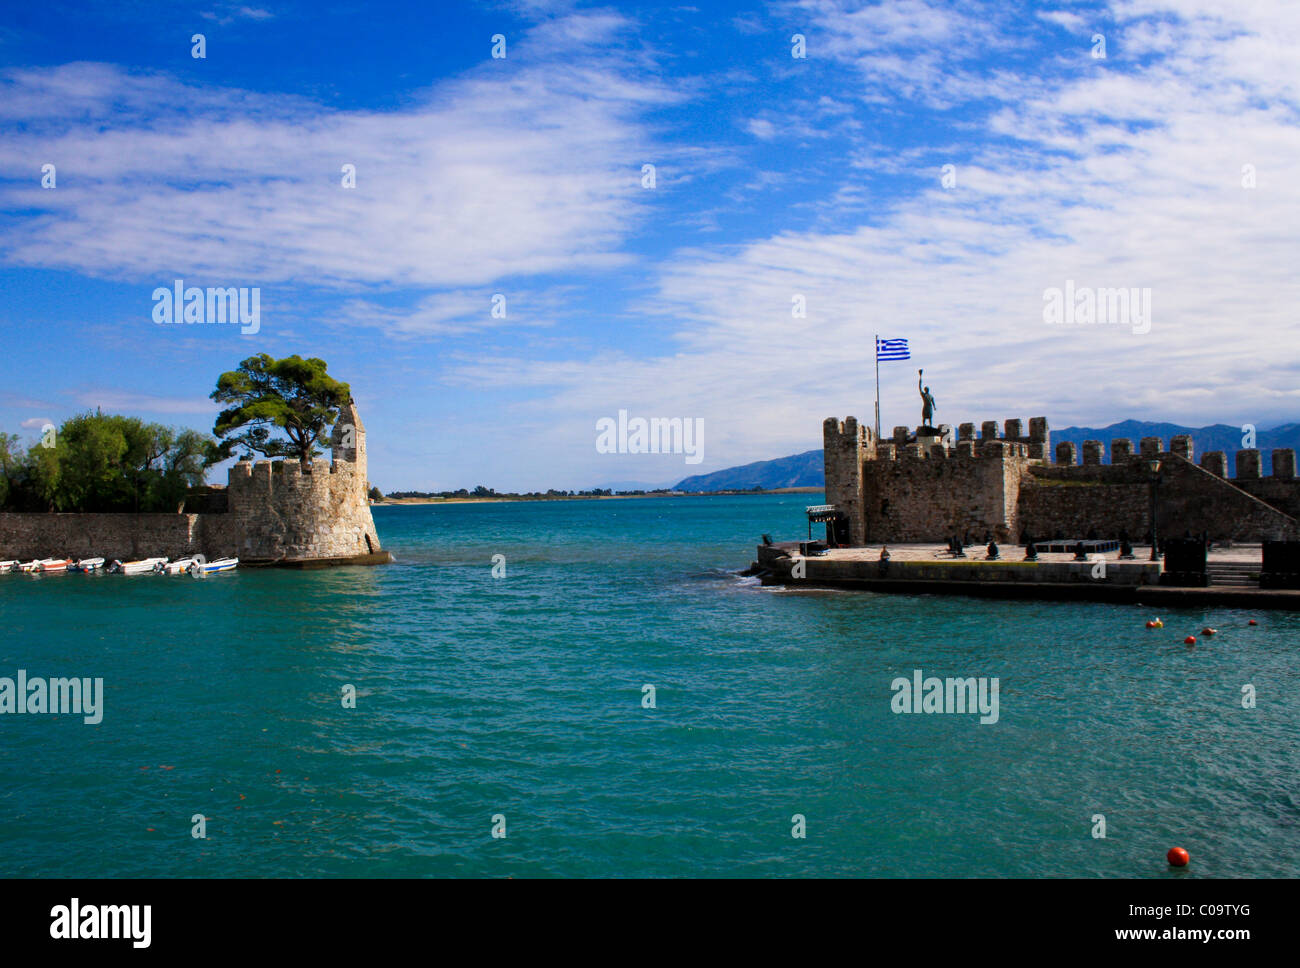 Venetian fortifications at the port of Nafpaktos, Aetolia-Acarnania, West Greece Stock Photo